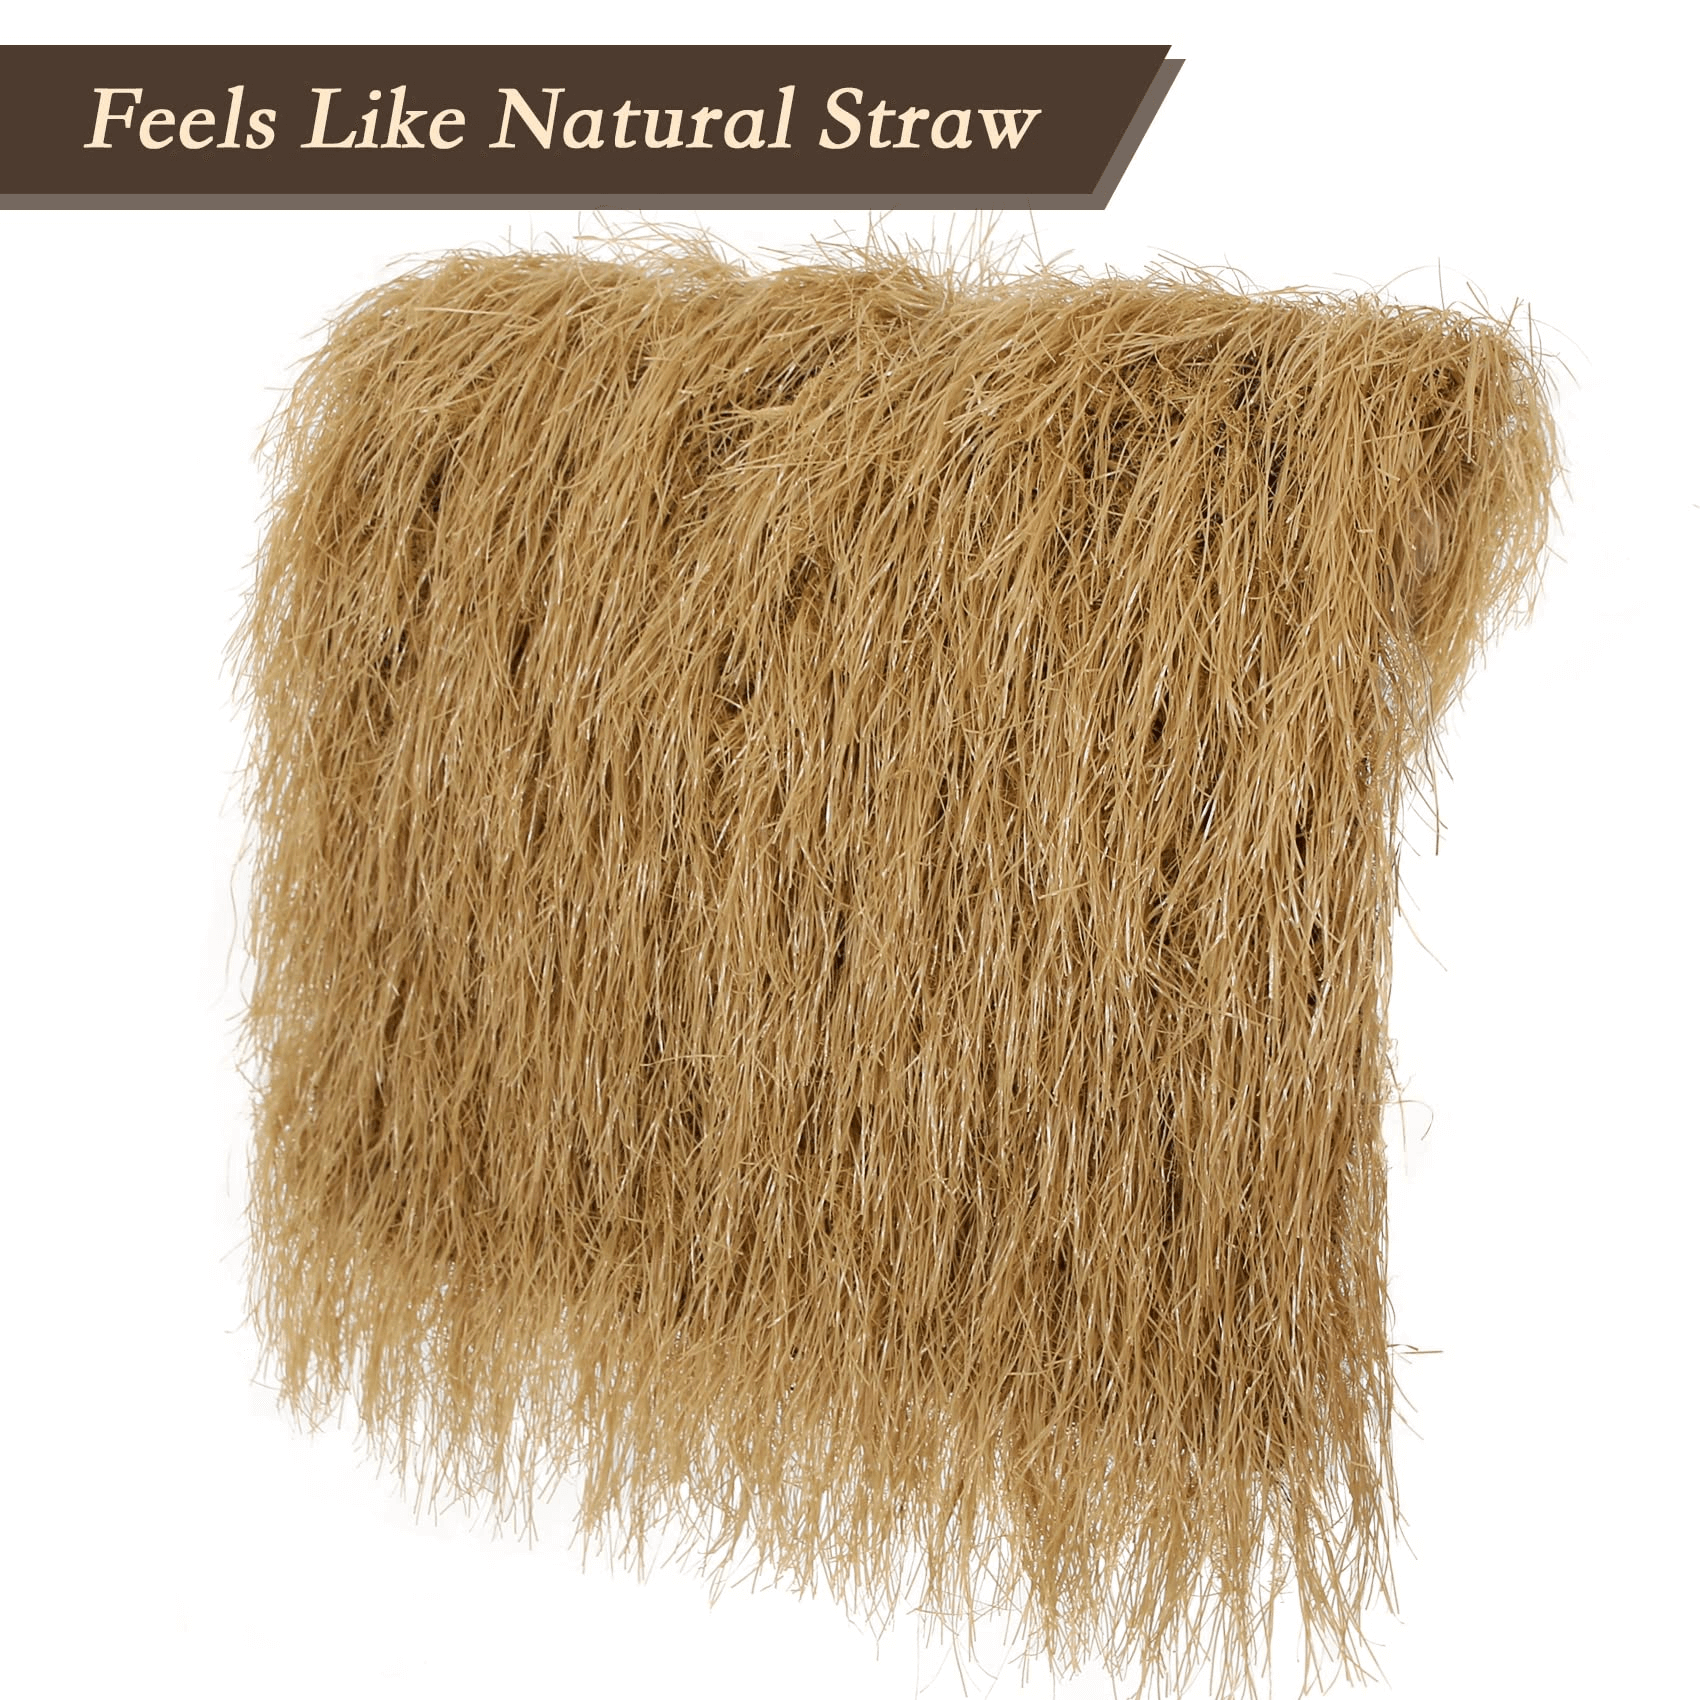  artificial tile with thatched roof, Artificial Straw